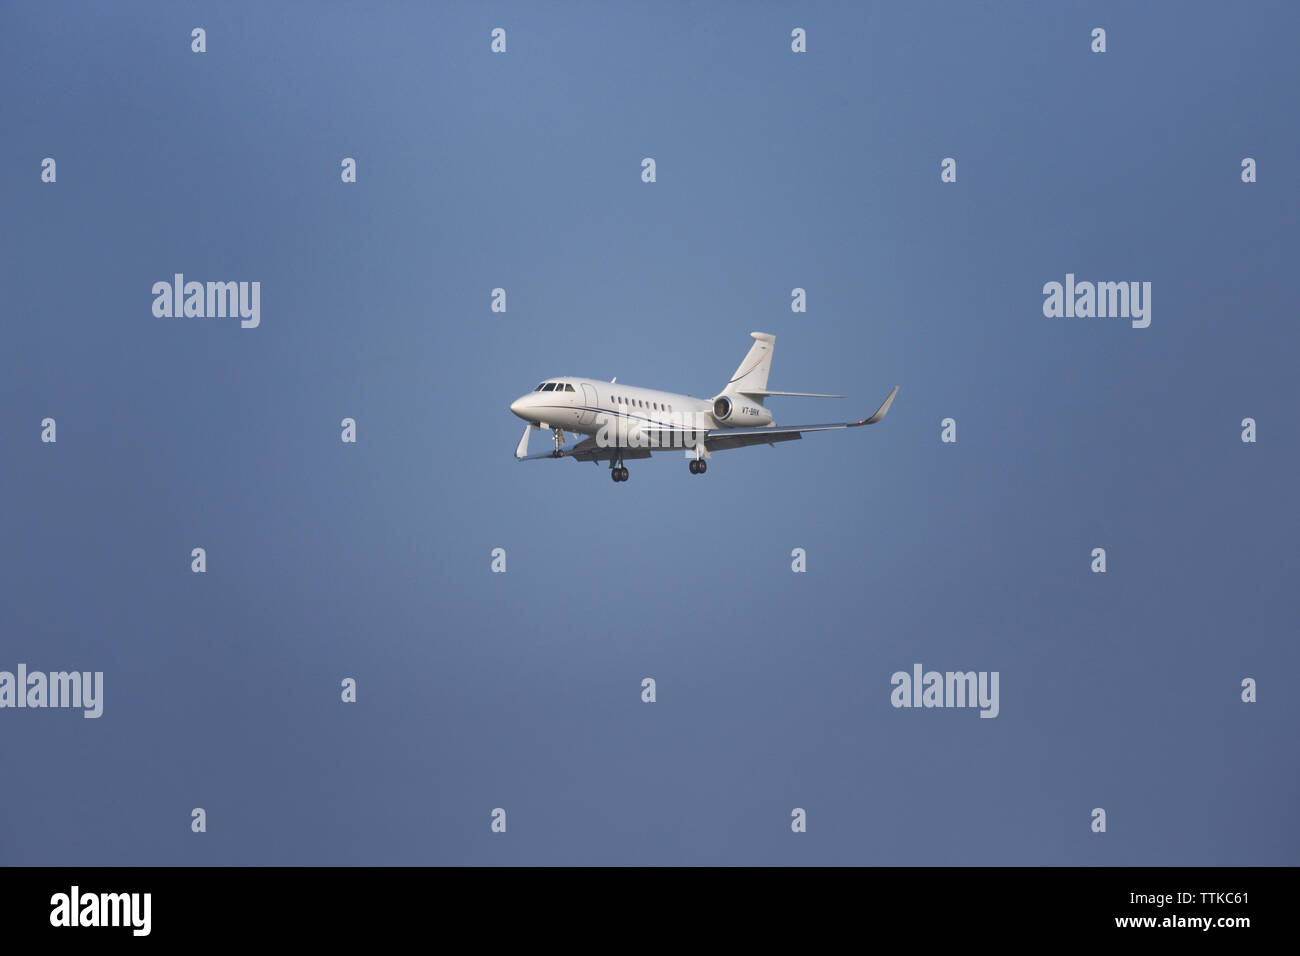 Low angle view of an airplane in flight Stock Photo